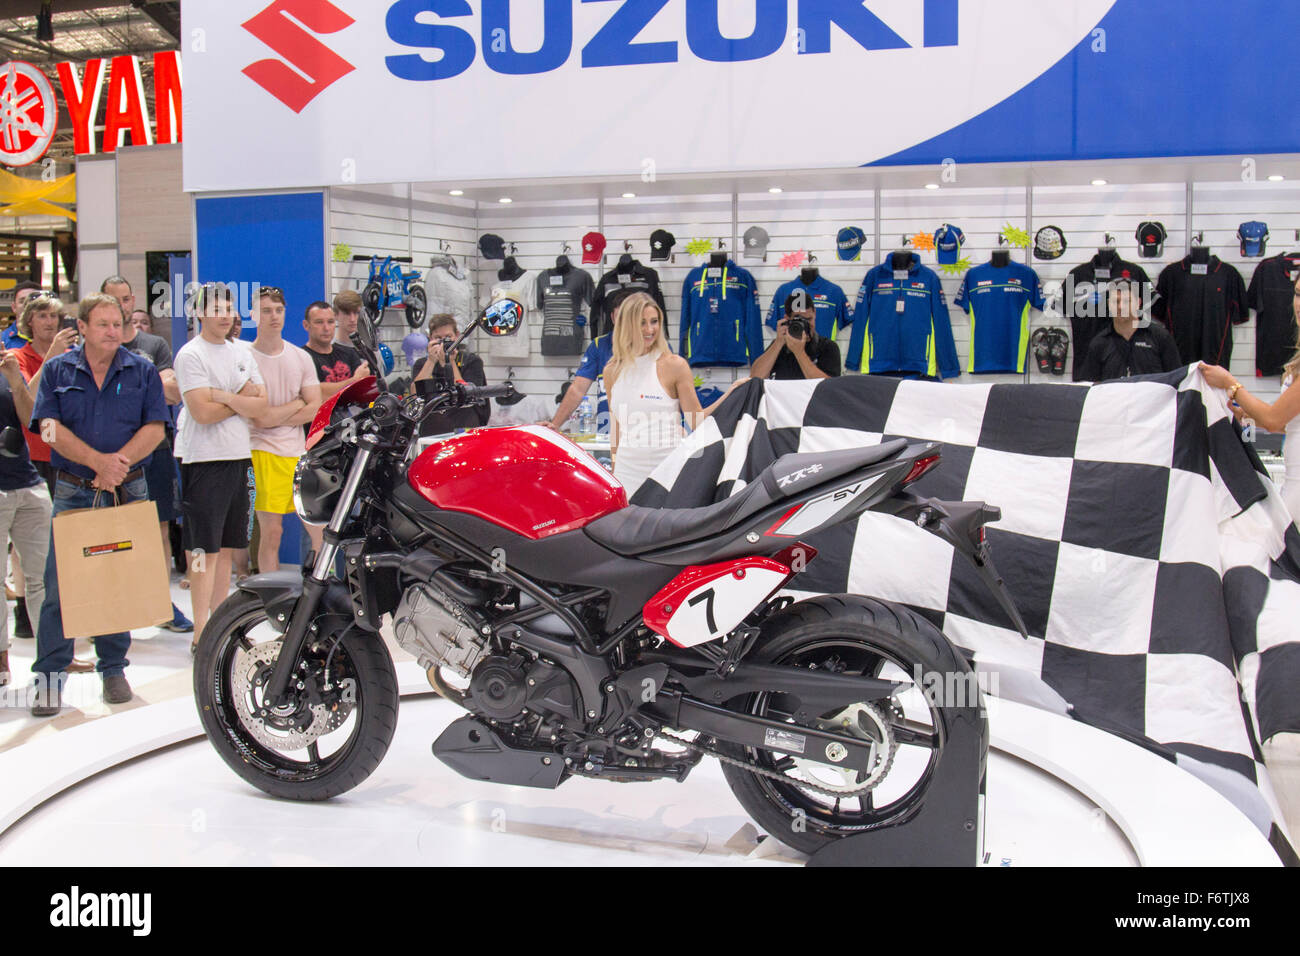 Sydney, Australia. 20th November, 2015. Sydney Motorcycle Show opening day. Suzuki stand at the Sydney motorcycle show where the new SV650 Motorbike was unveiled to the Australian public. Credit:  model10/Alamy Live News Stock Photo